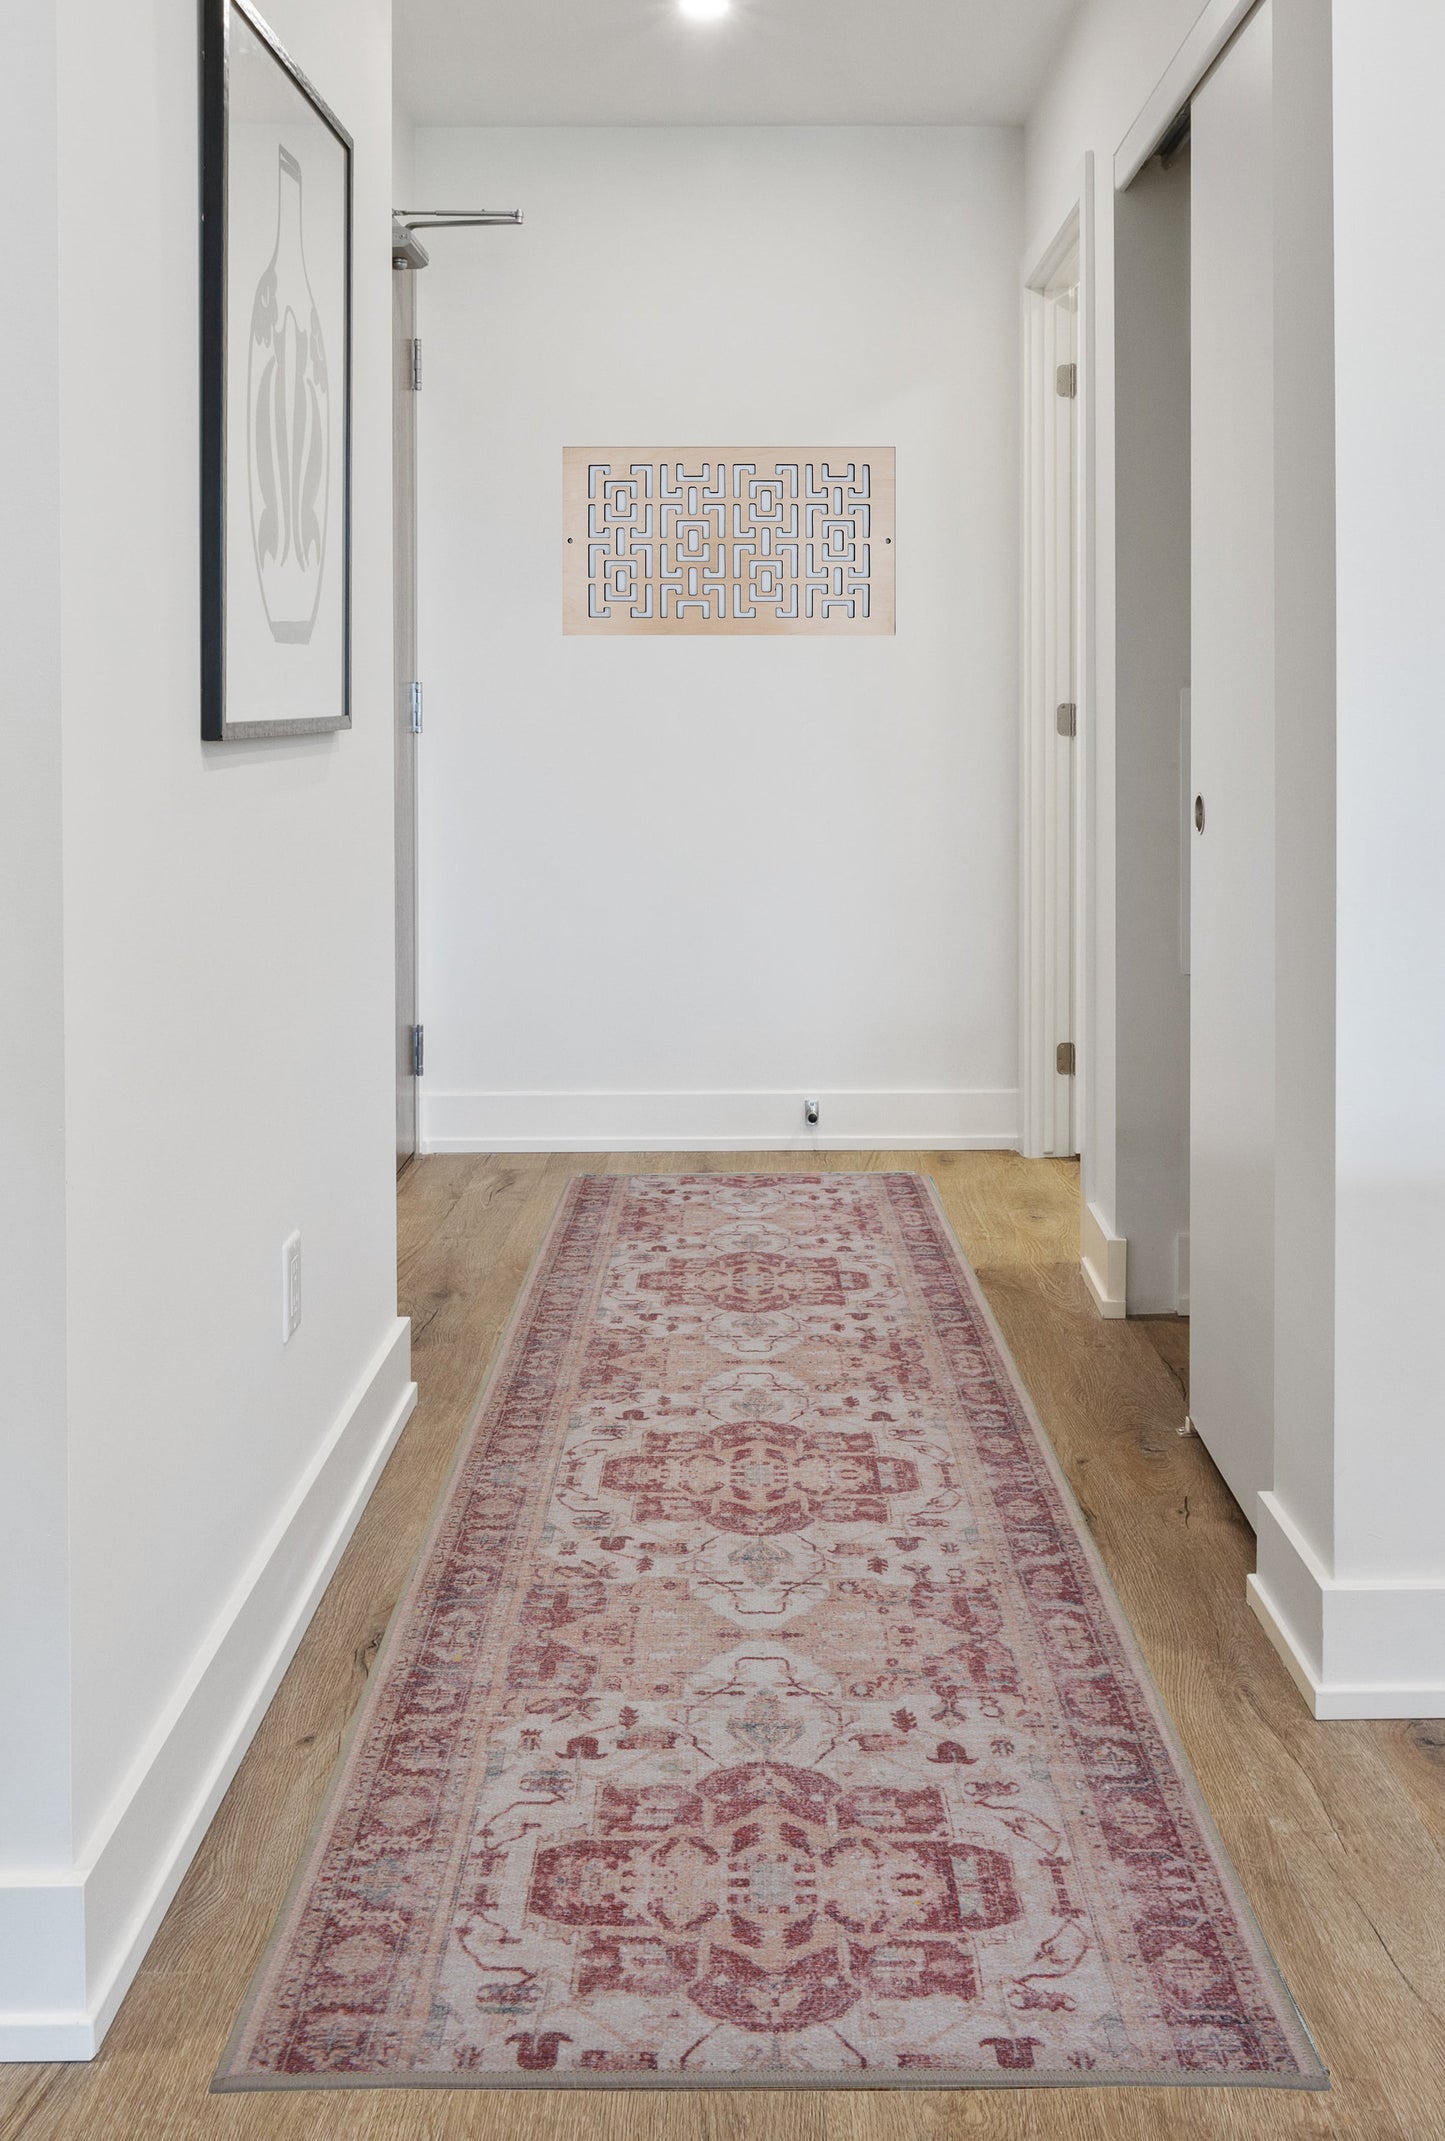 Image Home Collection Custom Size Runner Rug Mahal Design Cream-MultiColor Skid Resistant Cut To Size Rug Runners Customize By Feet and 25 in Width